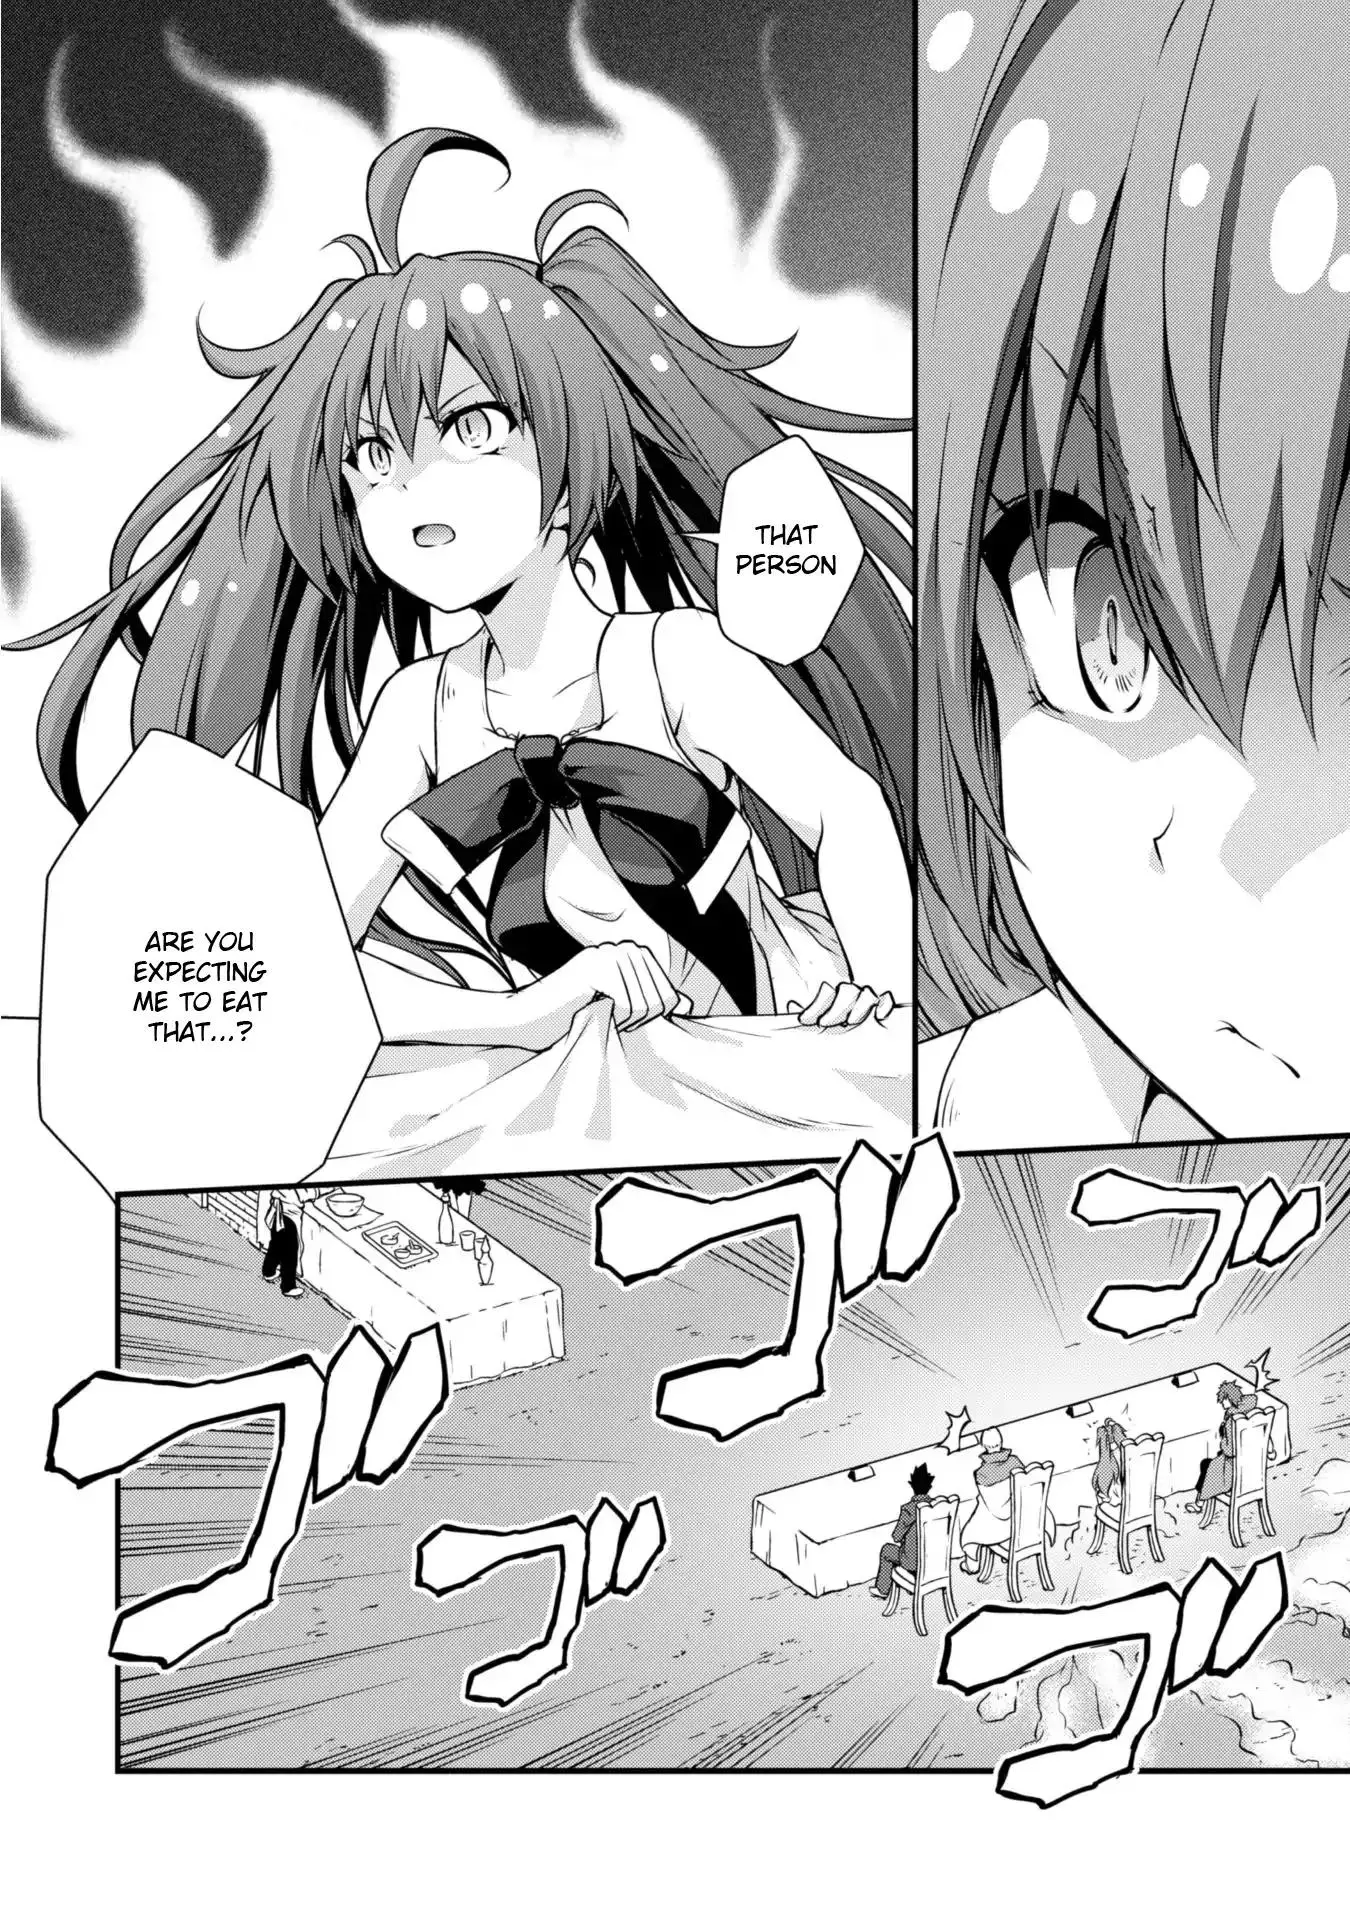 Tensei Shitara Slime Datta Ken: The Ways of Strolling in the Demon Country - 18 page 3